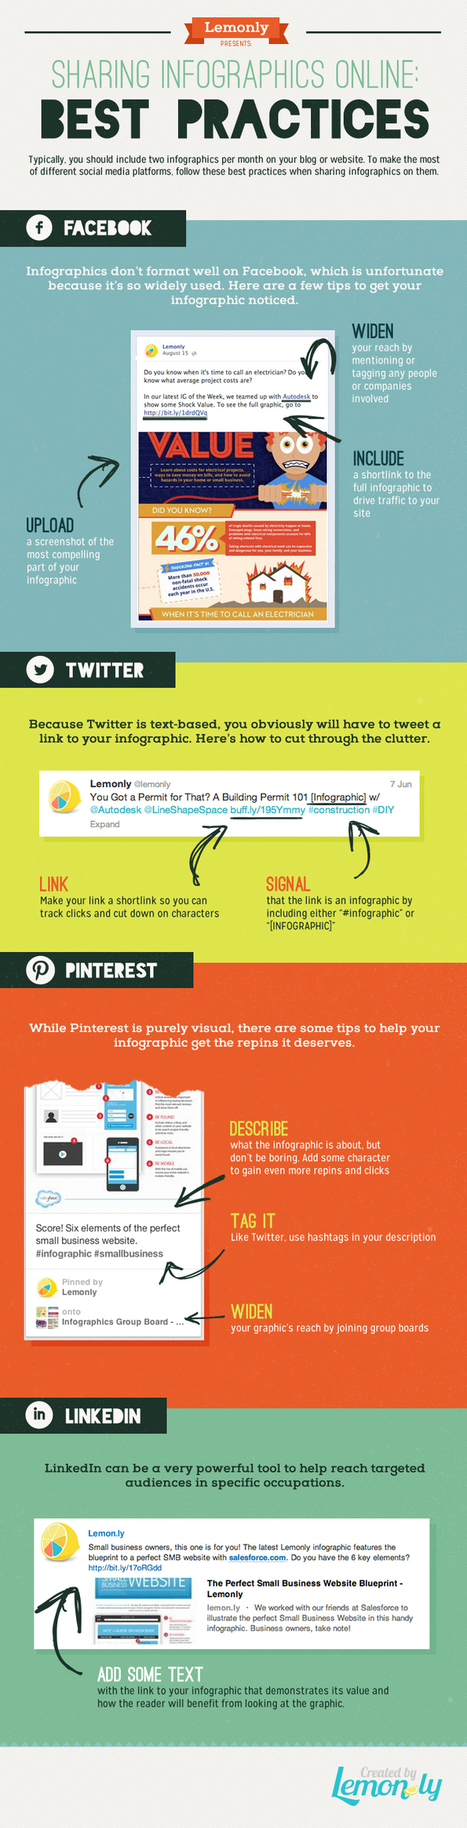 Sharing Infographics on Social Media | Time to Learn | Scoop.it